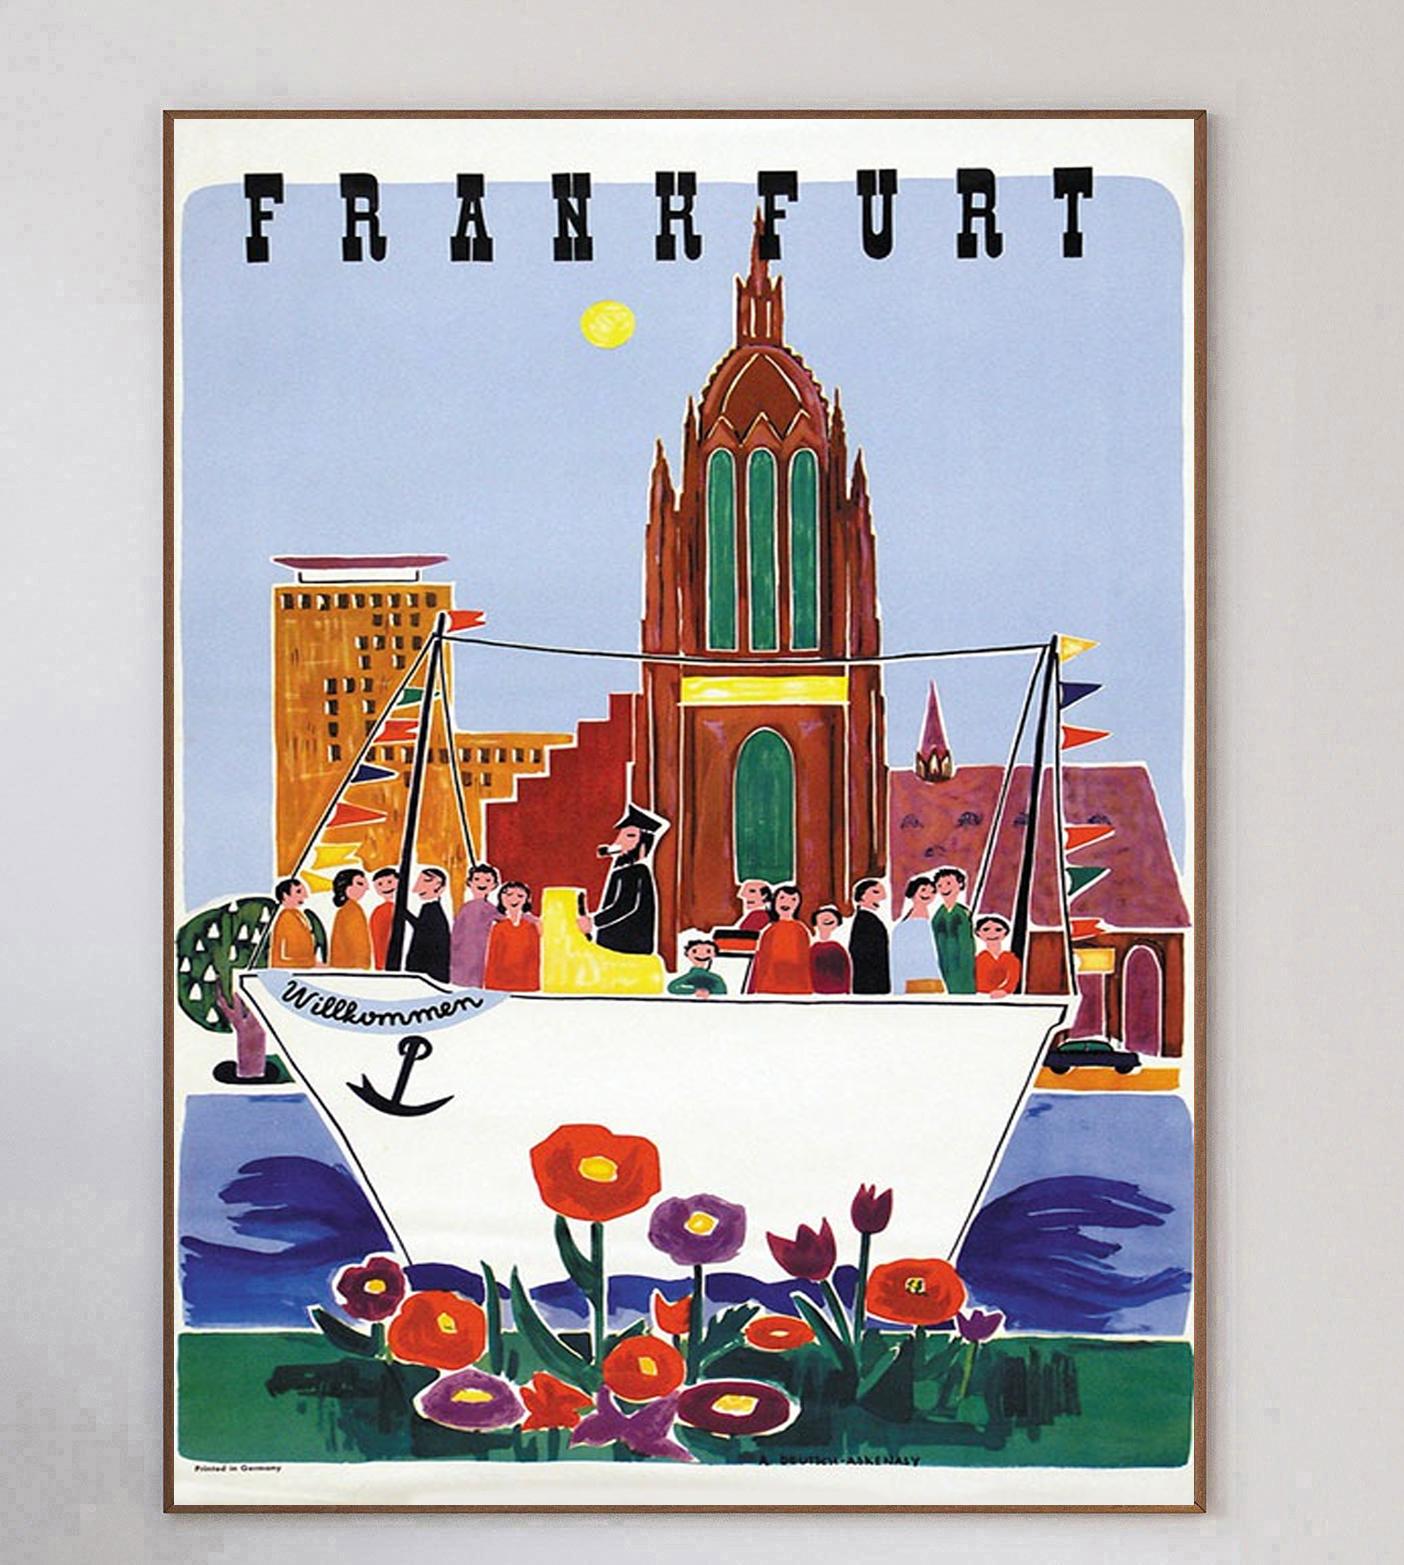 Wonderfully charming poster promoting the German city of Frankfurt for tourism. Created in 1951 by the tourism board of the region, the image depicts a group of tourists enjoying a boat ride down the river and seeing landmarks of the city including